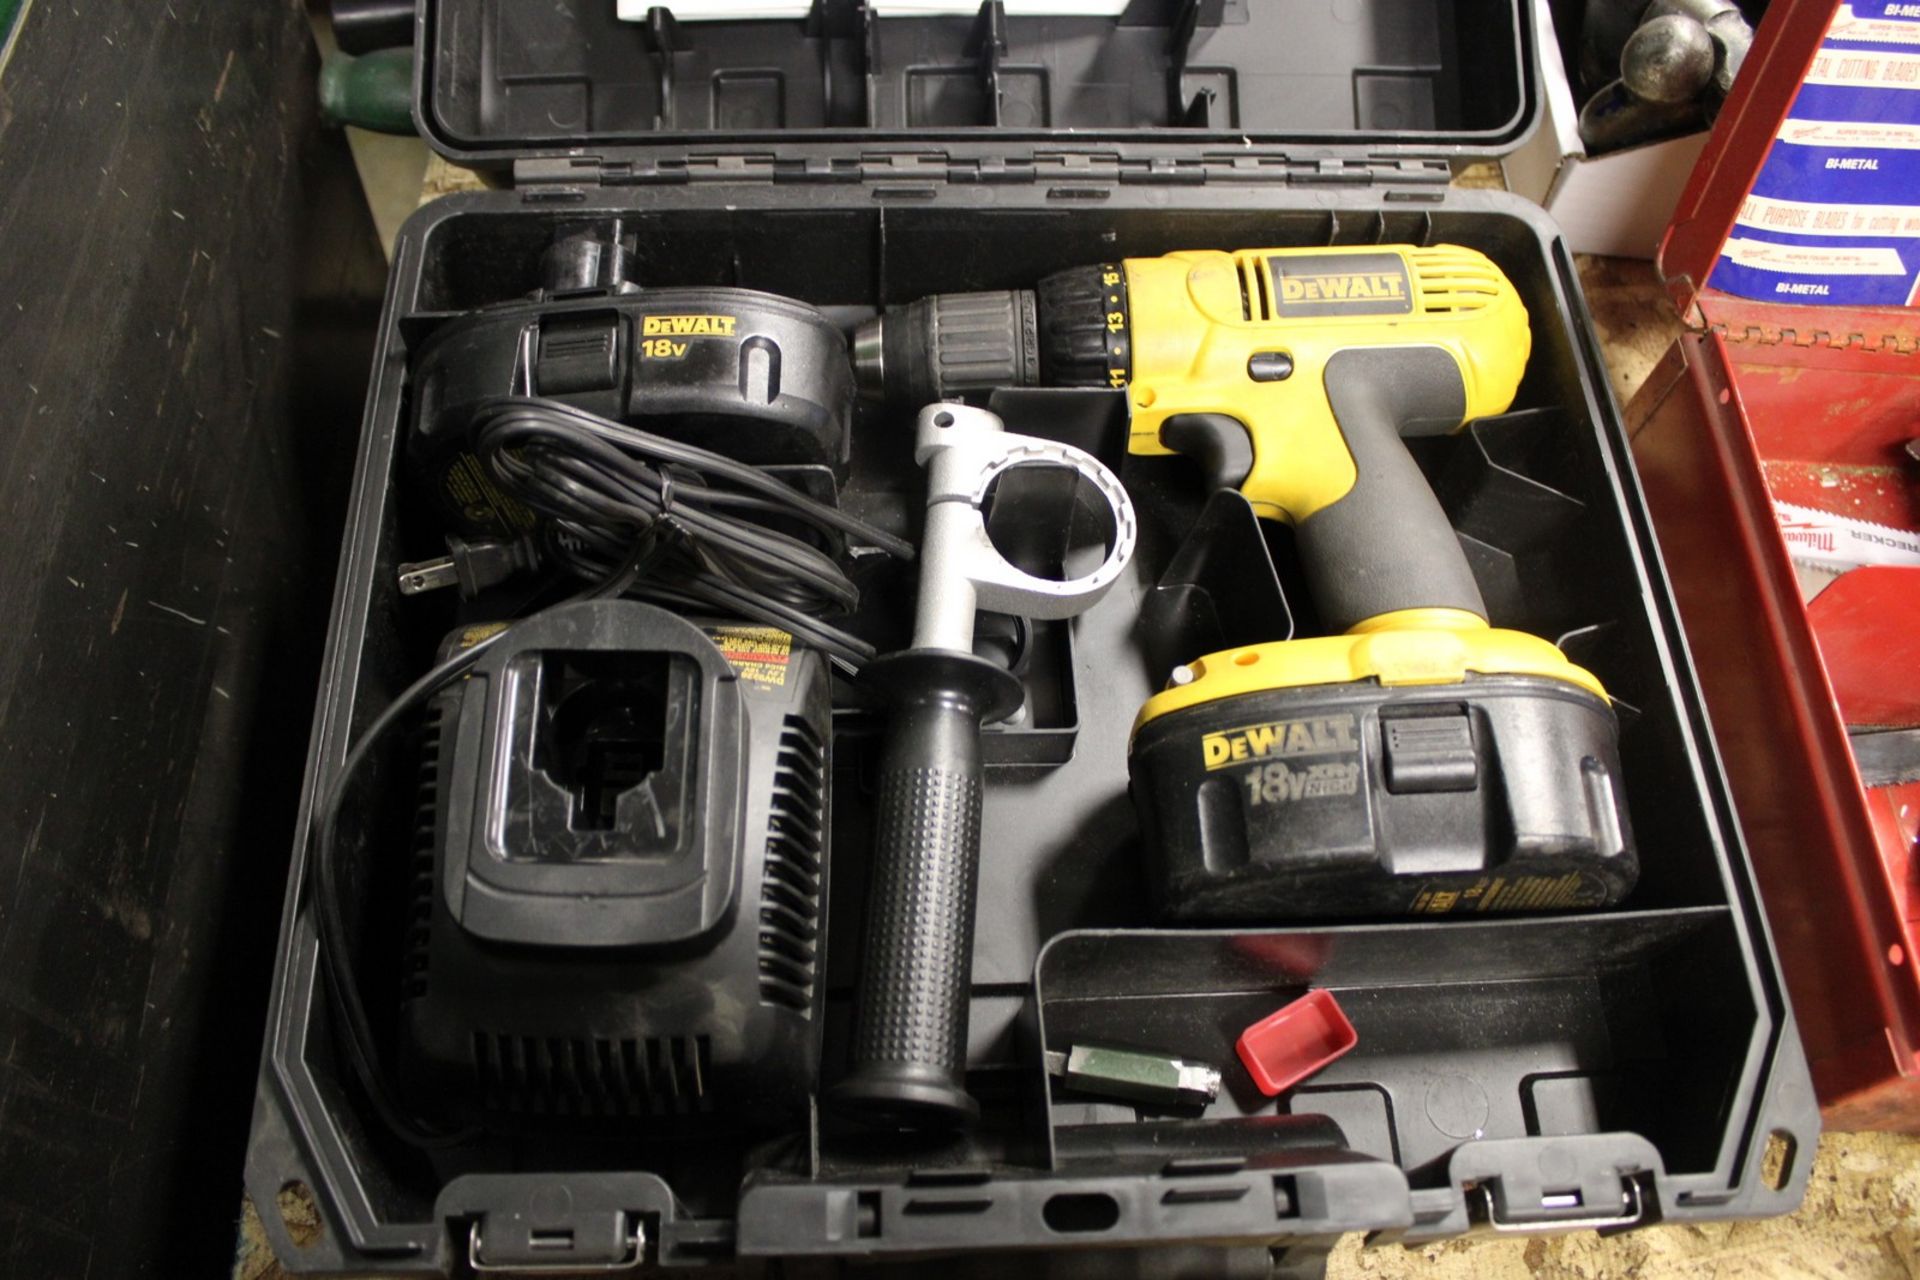 DEWALT MODEL DC970 1/2" CORDLESS DRILL WITH CASE, CHARGER, (2) BATTERIES